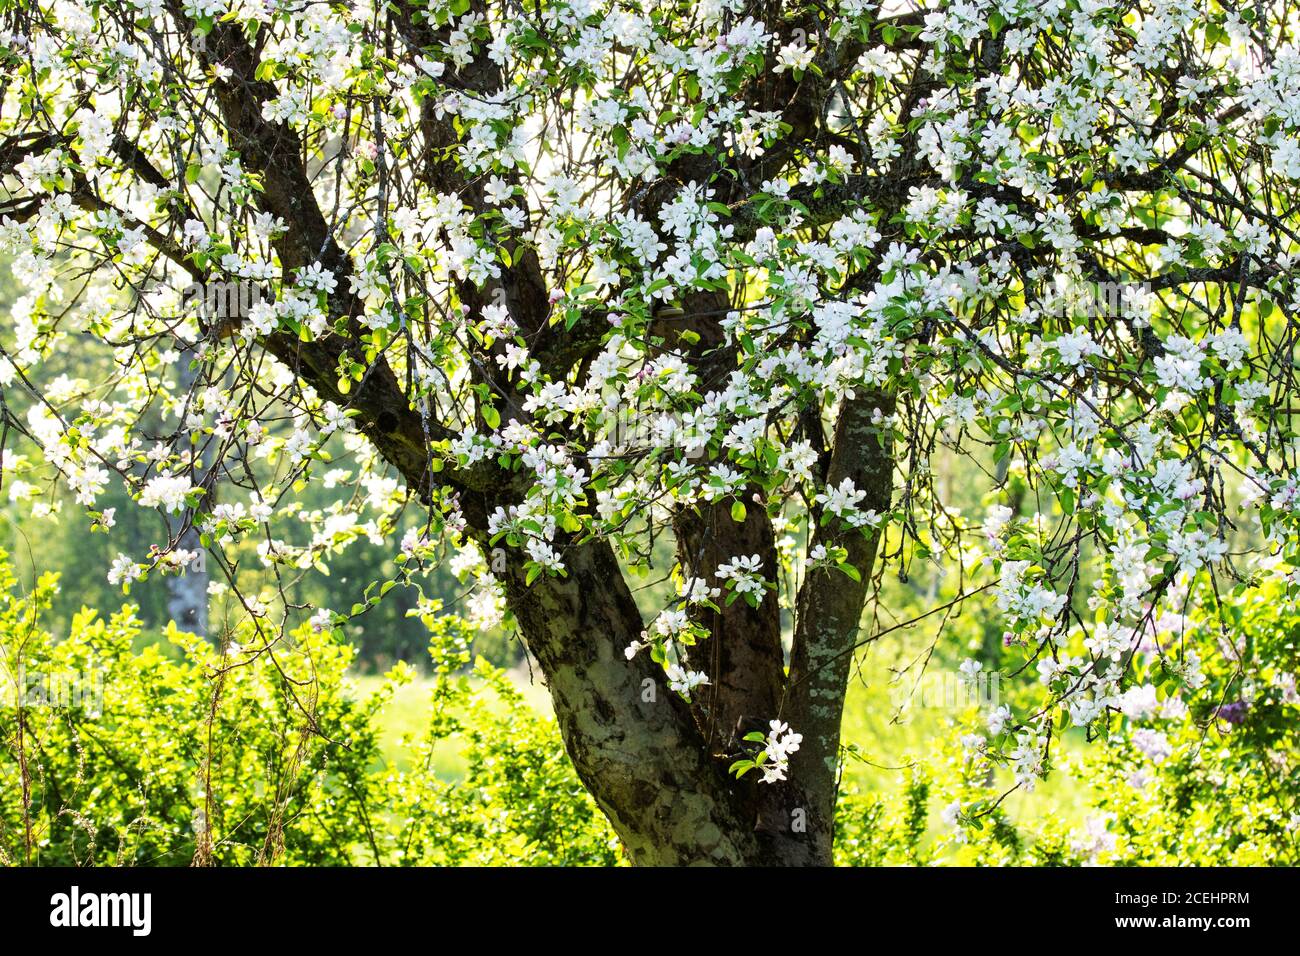 A beautiful flowering apple tree with white blossoms during spring in rural Estonia, Northern Europe. Stock Photo